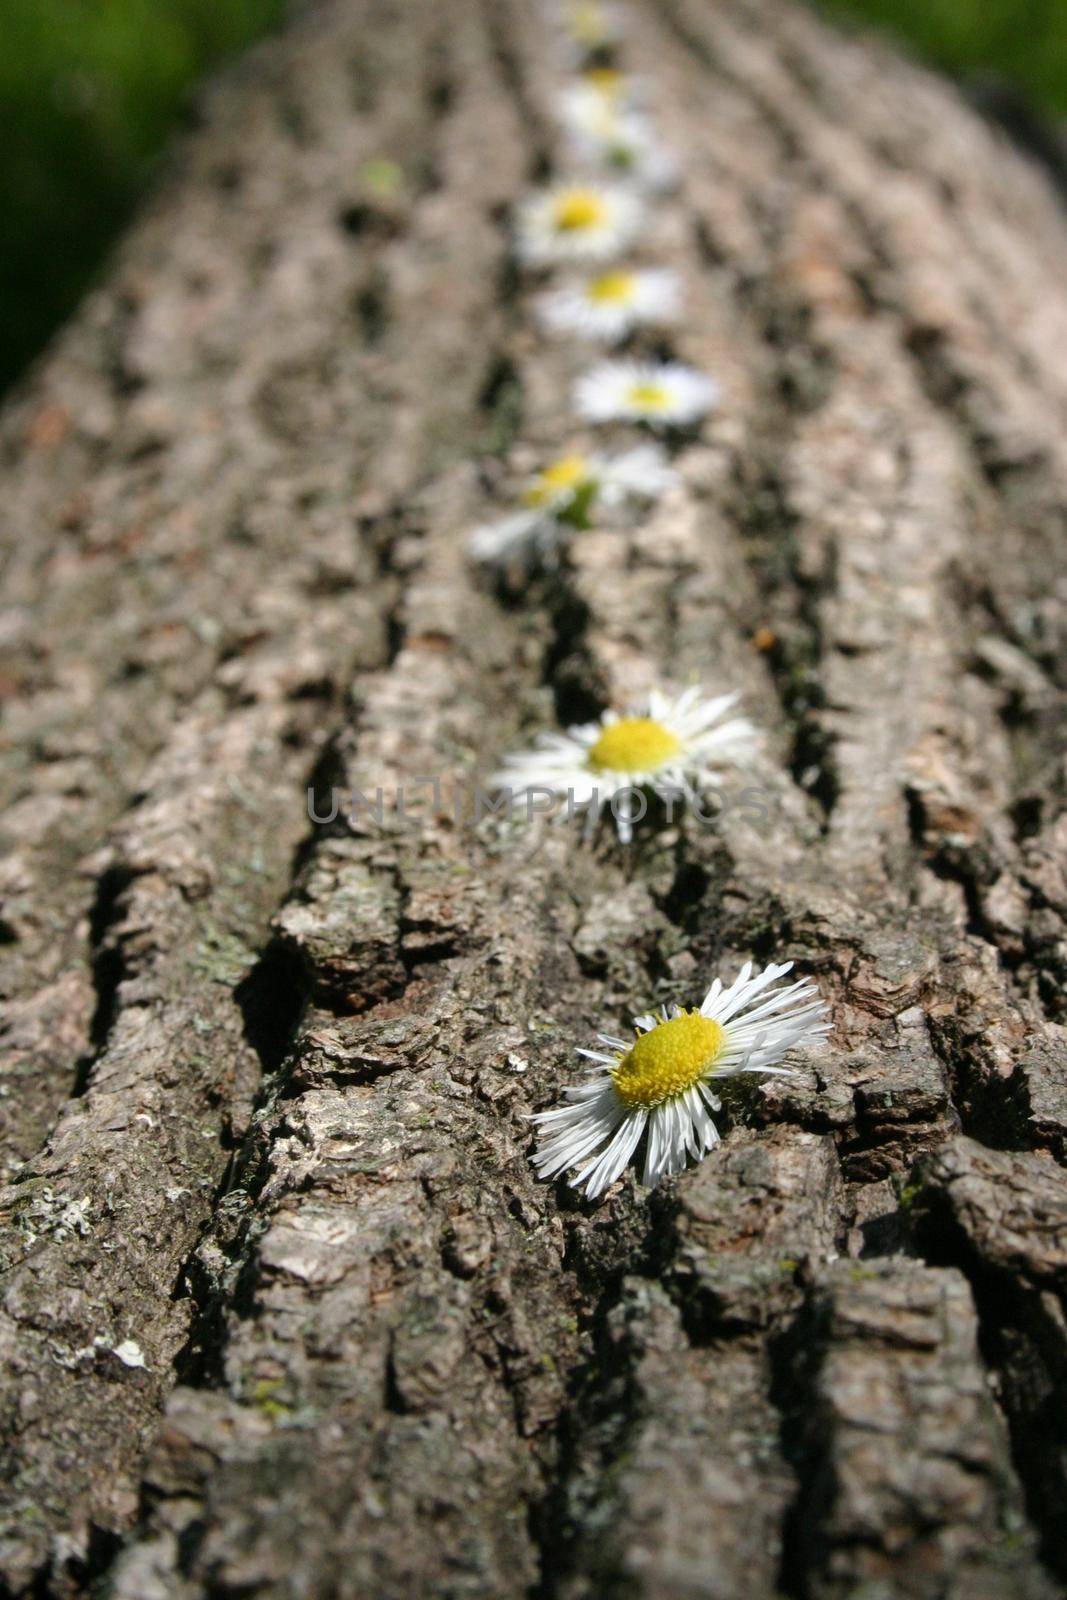 Small yellow and white daisy flowers line the bark of an old tree or log by njproductions